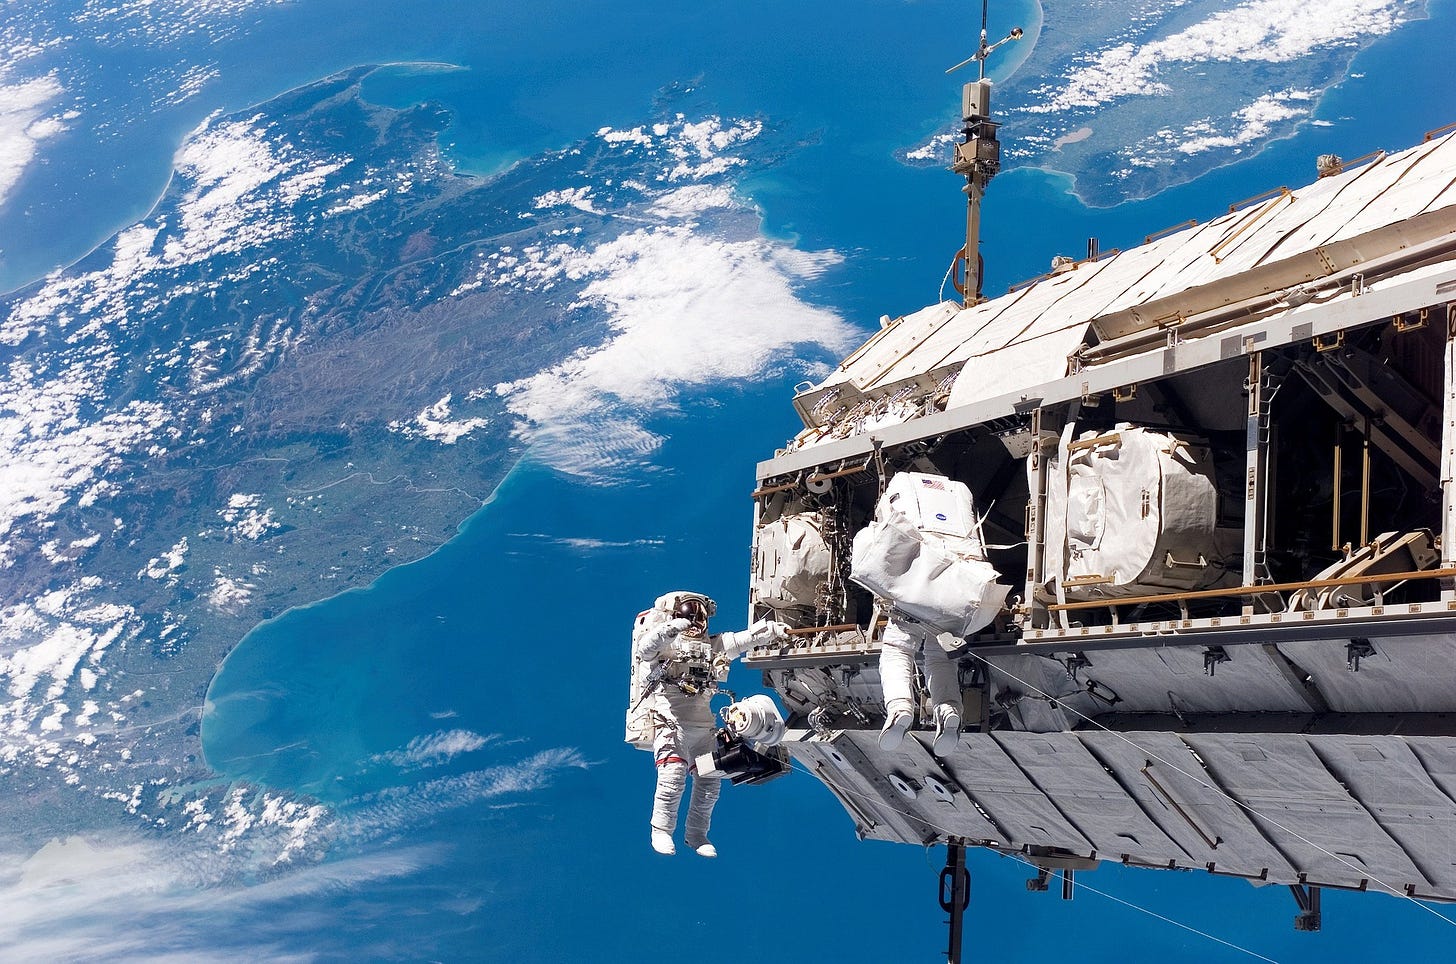 picture of two astronauts on a spacewalk on the International Space Station. in the background is the surface of the Earth, over the ocean and a large island